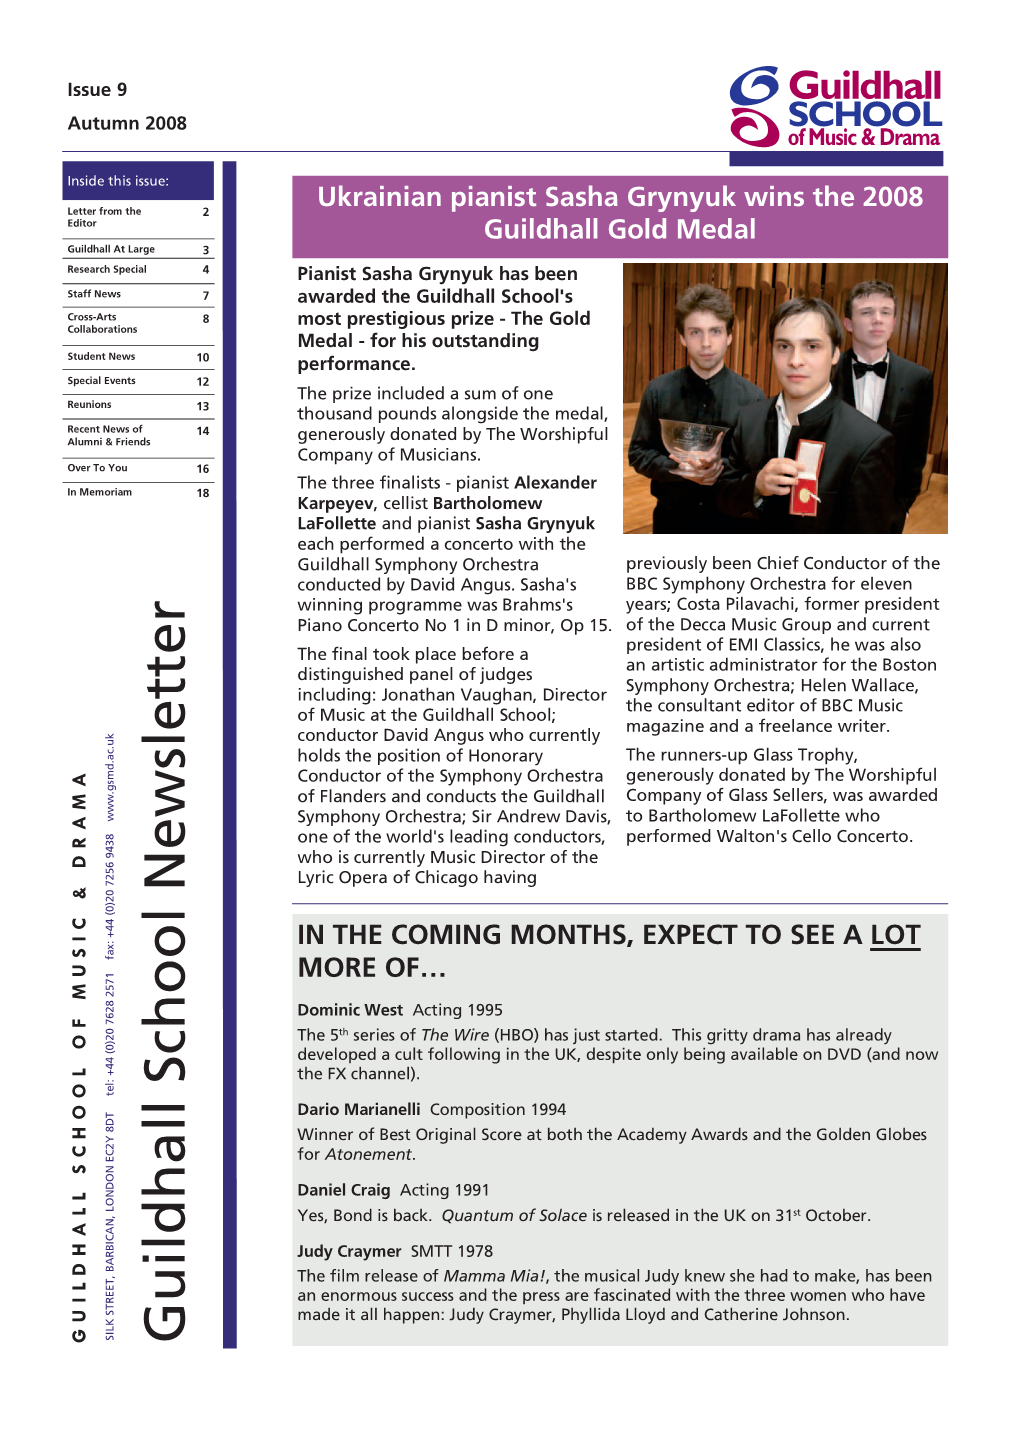 Guildhall School Newsletter Page 2 GUILDHALL SCHOOL NEWSLETTER